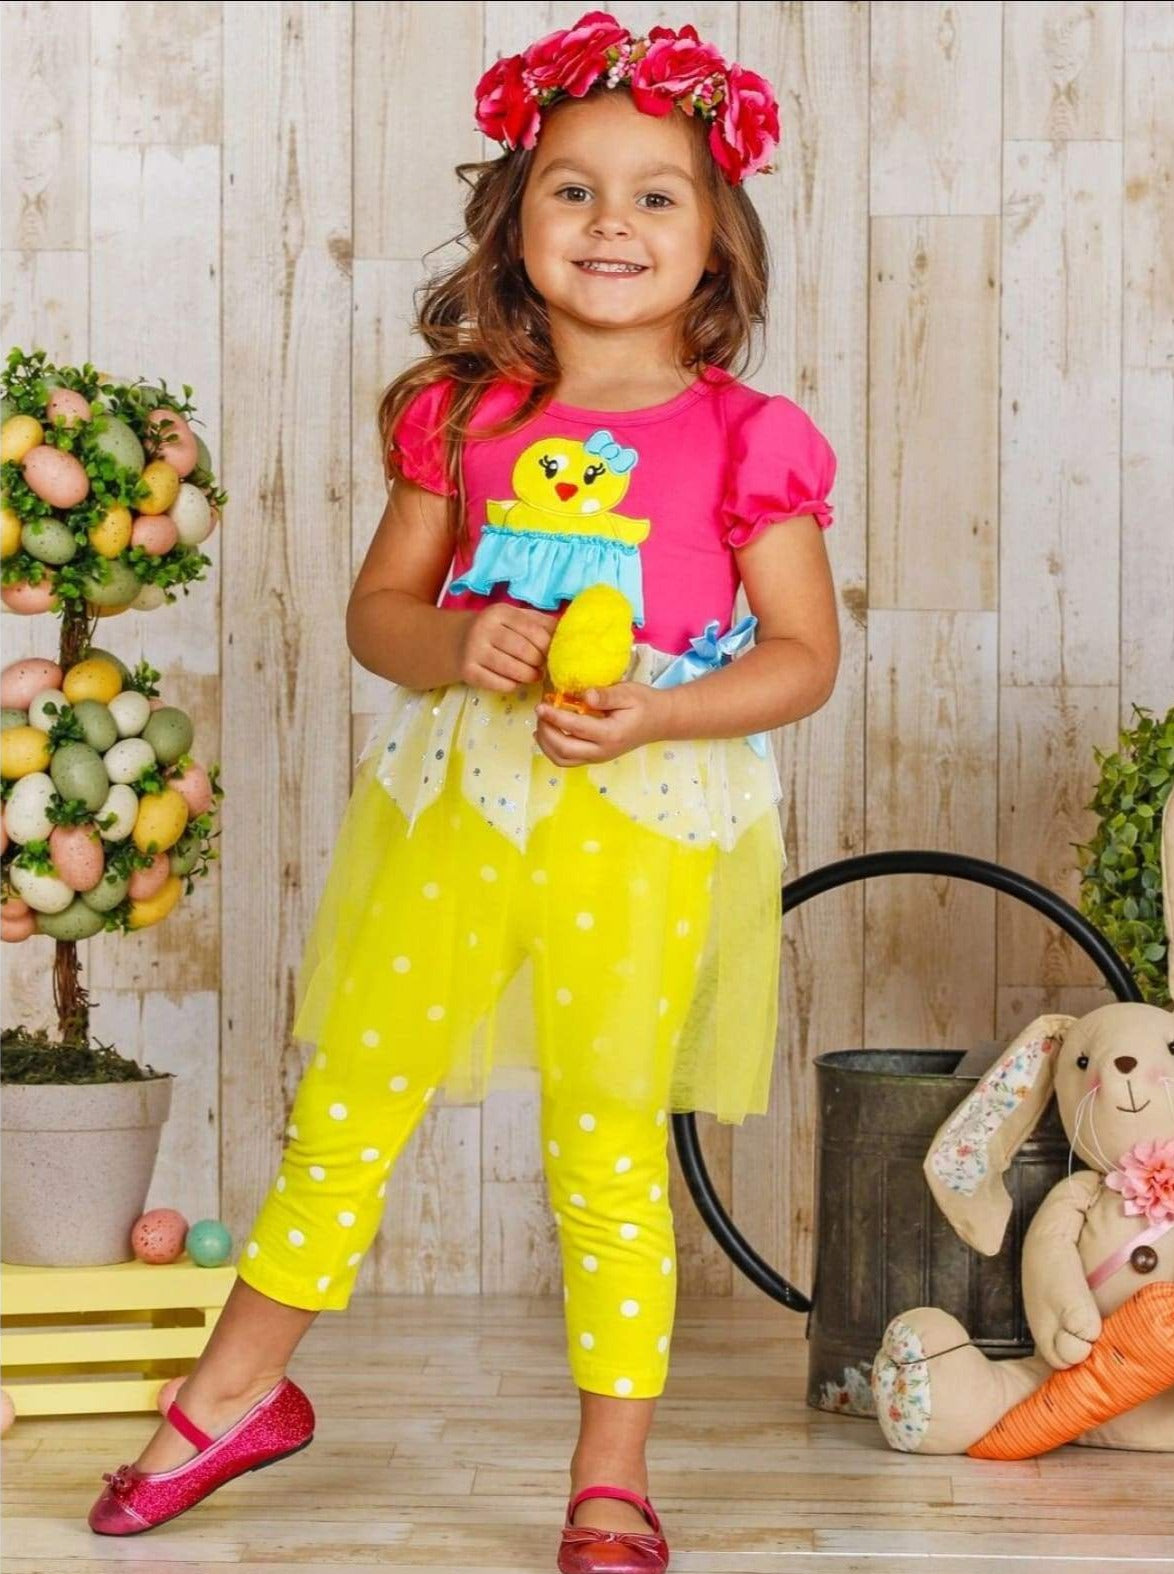 Girls Spring Easter-themed set features ruffle sleeves, chick applique, and two-tier sequin tulle hem with stretchy polka dot capris-length leggings for 2T to 10Y toddlers and girls